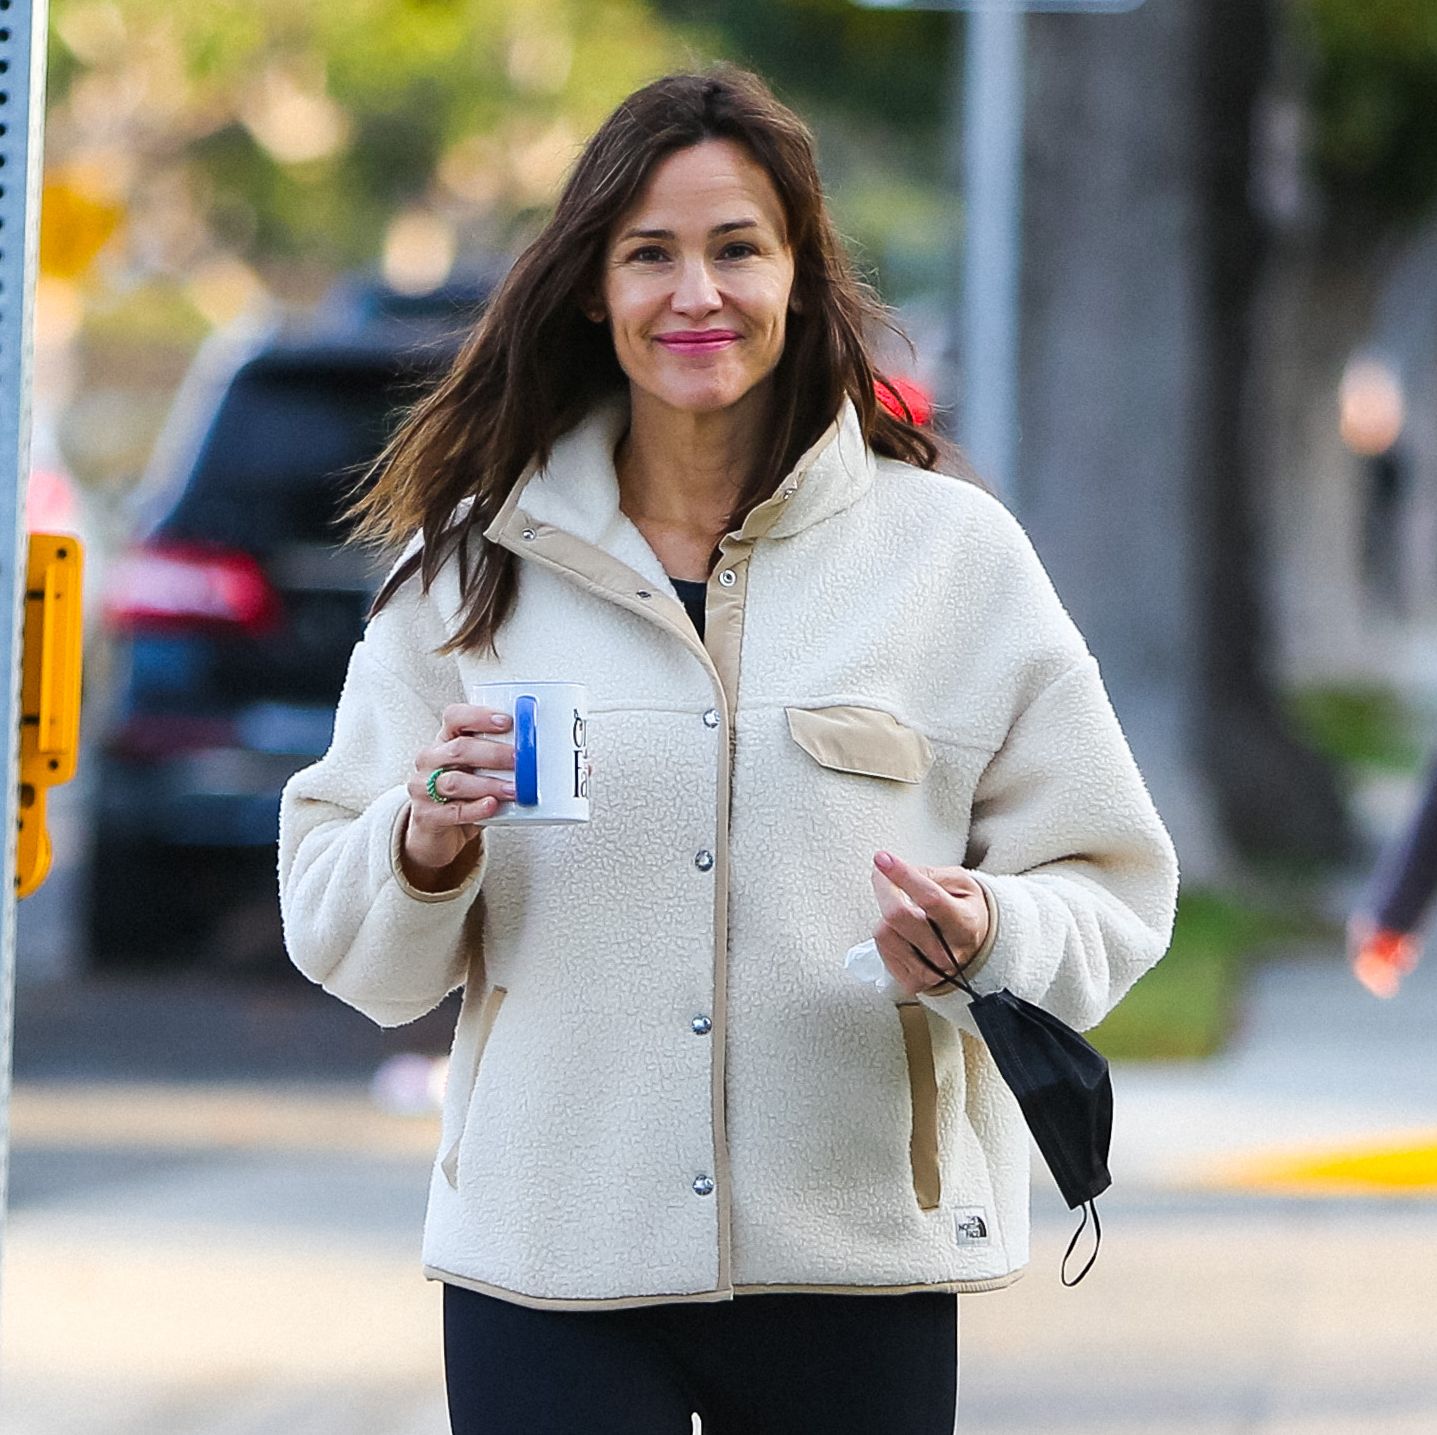 Jennifer Garner’s Latest Go-To Sneakers Are From This Podiatrist-Approved Brand